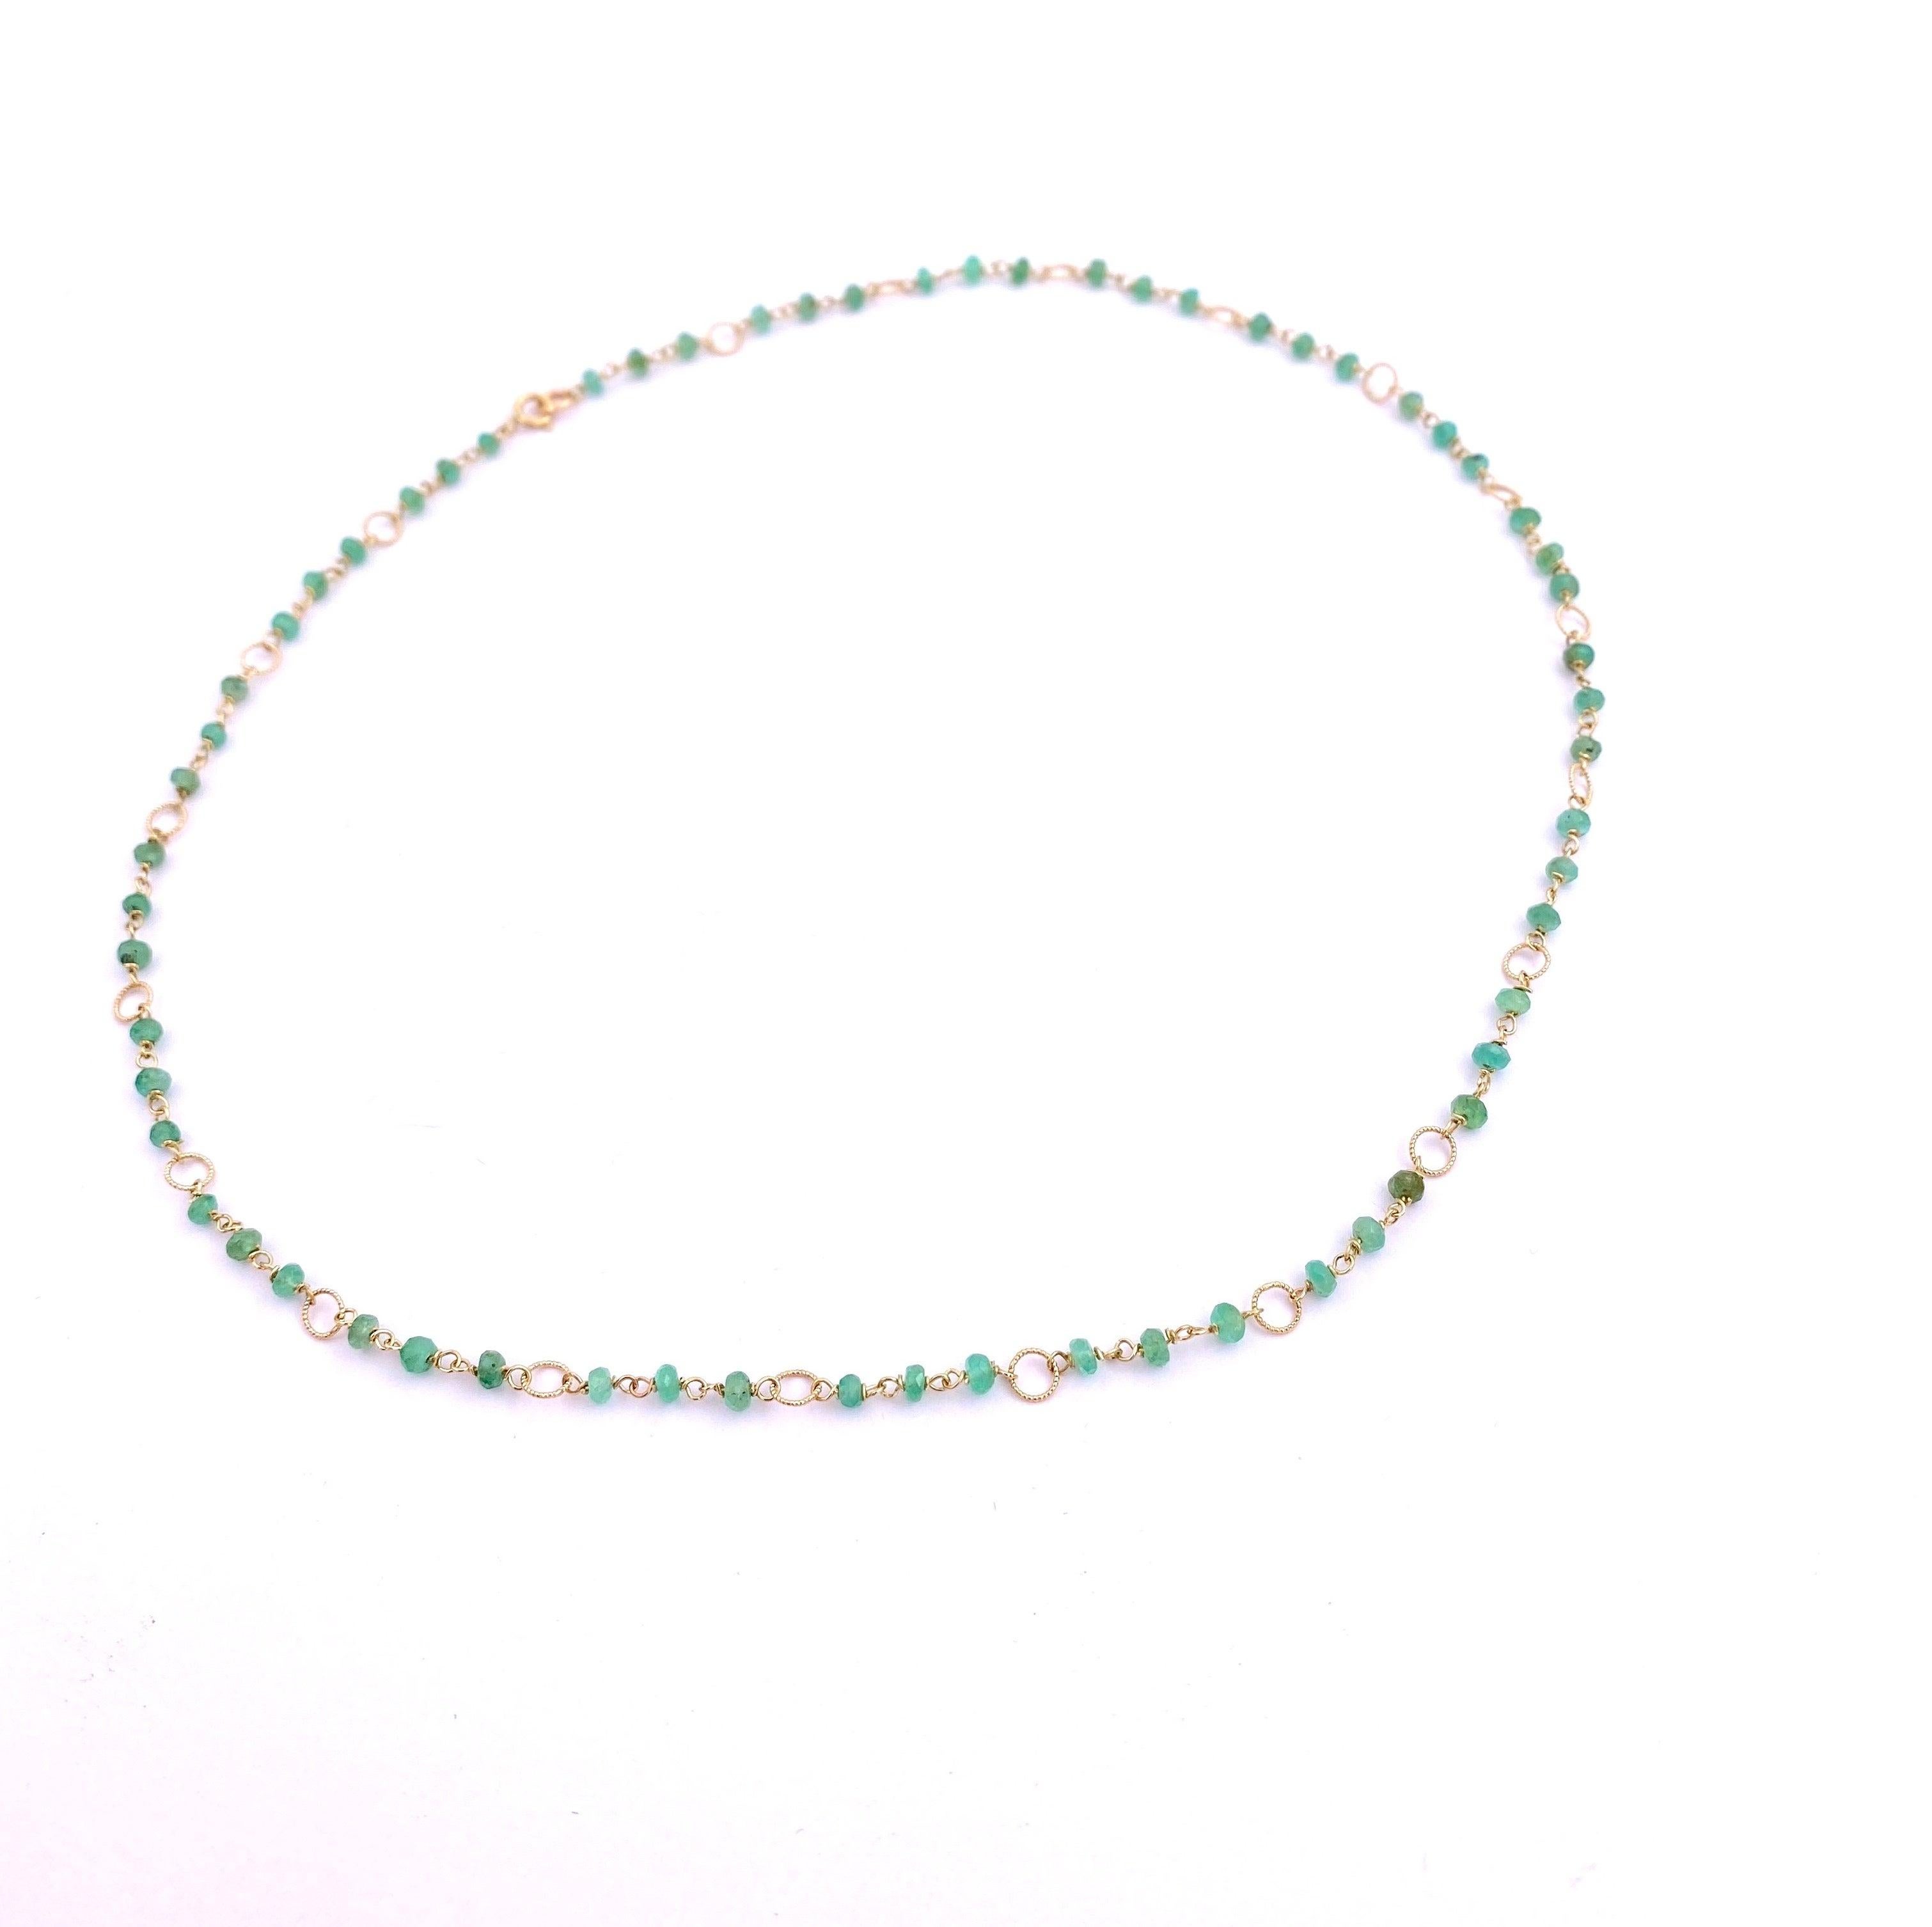 Deco Style 7.5 Carat Emeralds 18 Karat Yellow Gold Twisted Links Beaded Necklace For Sale 6